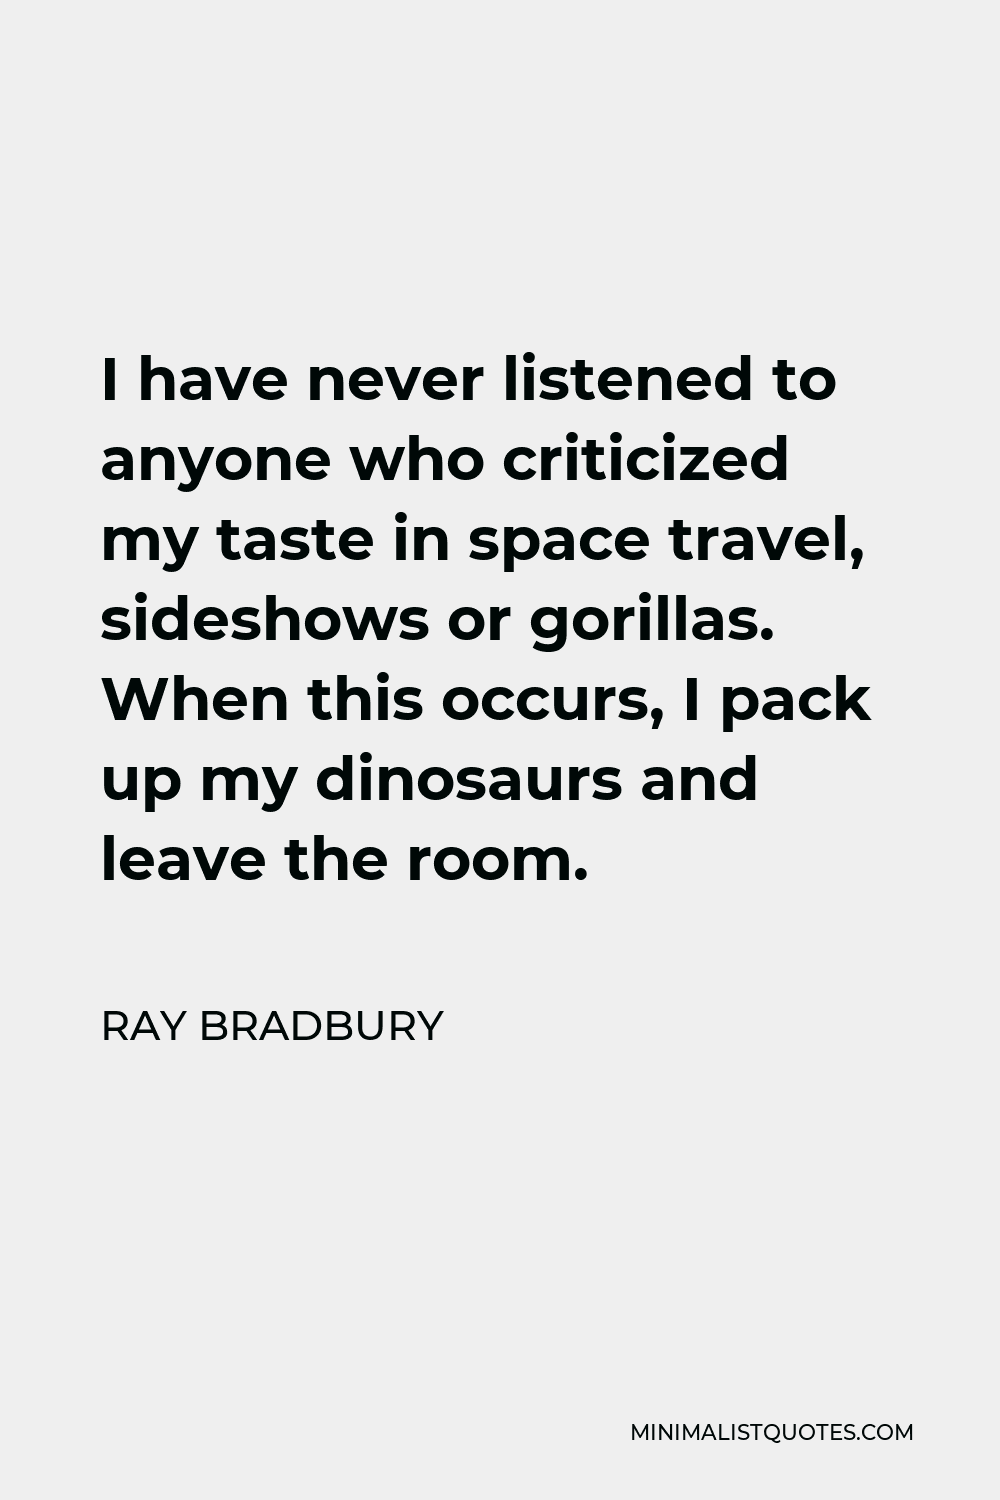 Ray Bradbury Quote - I have never listened to anyone who criticized my taste in space travel, sideshows or gorillas. When this occurs, I pack up my dinosaurs and leave the room.